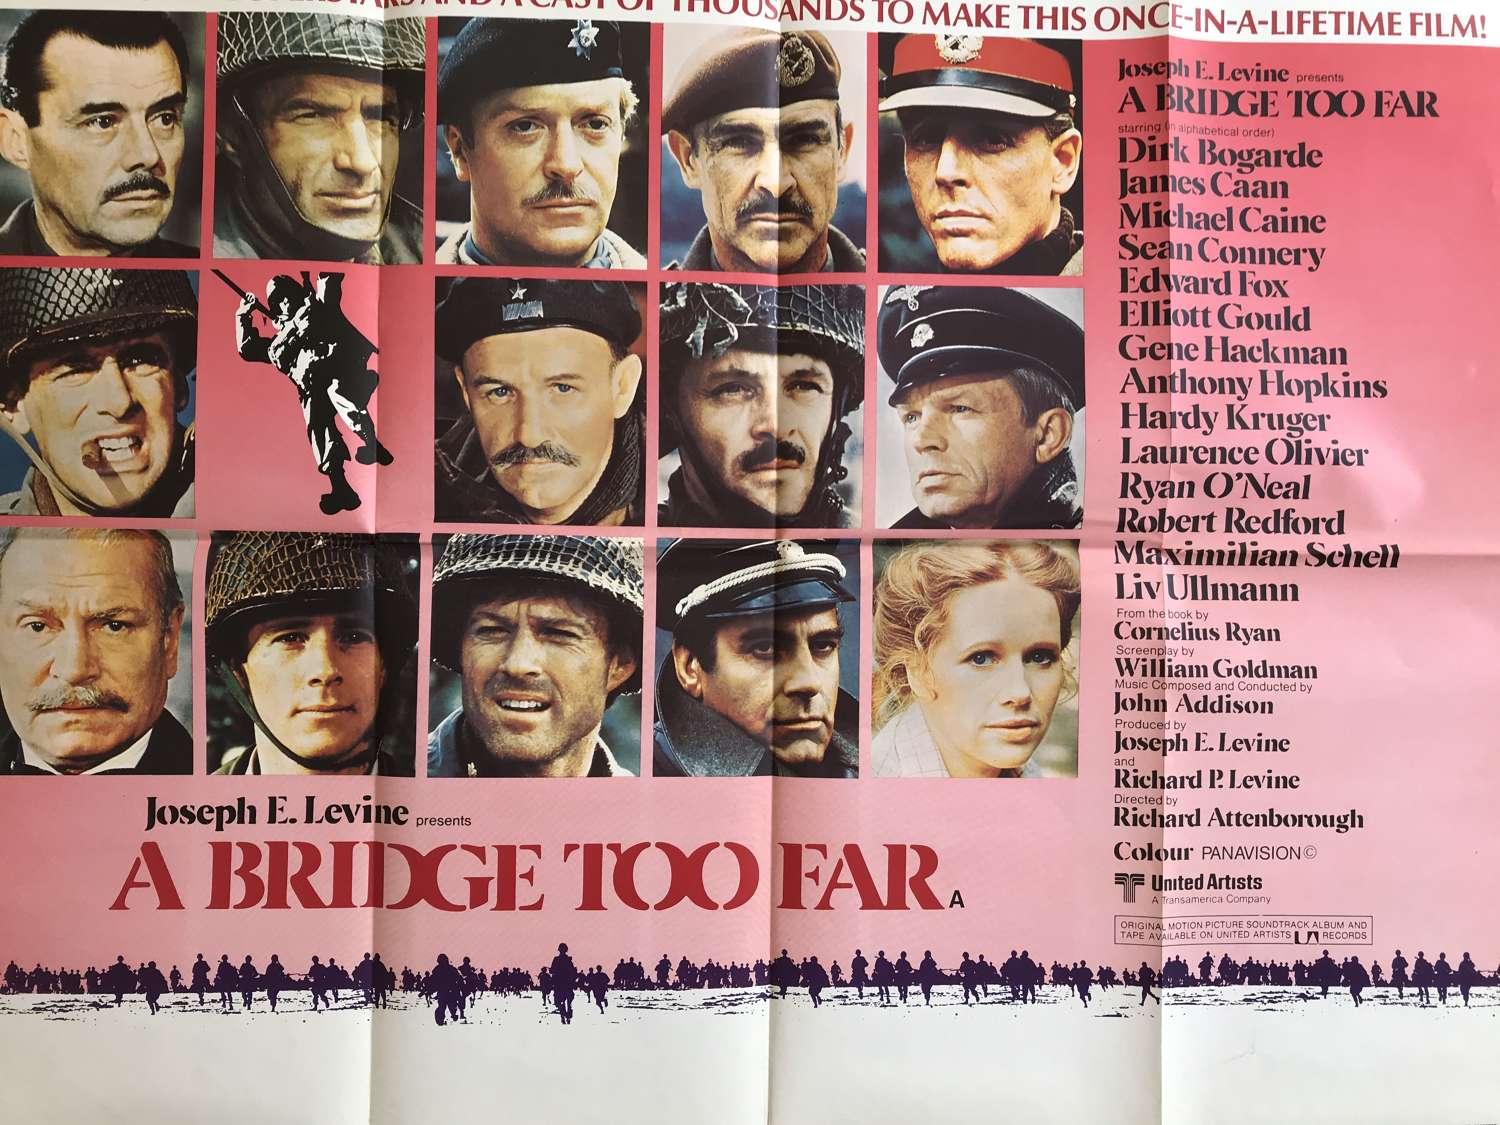 A bridge to far film poster dating from 1977